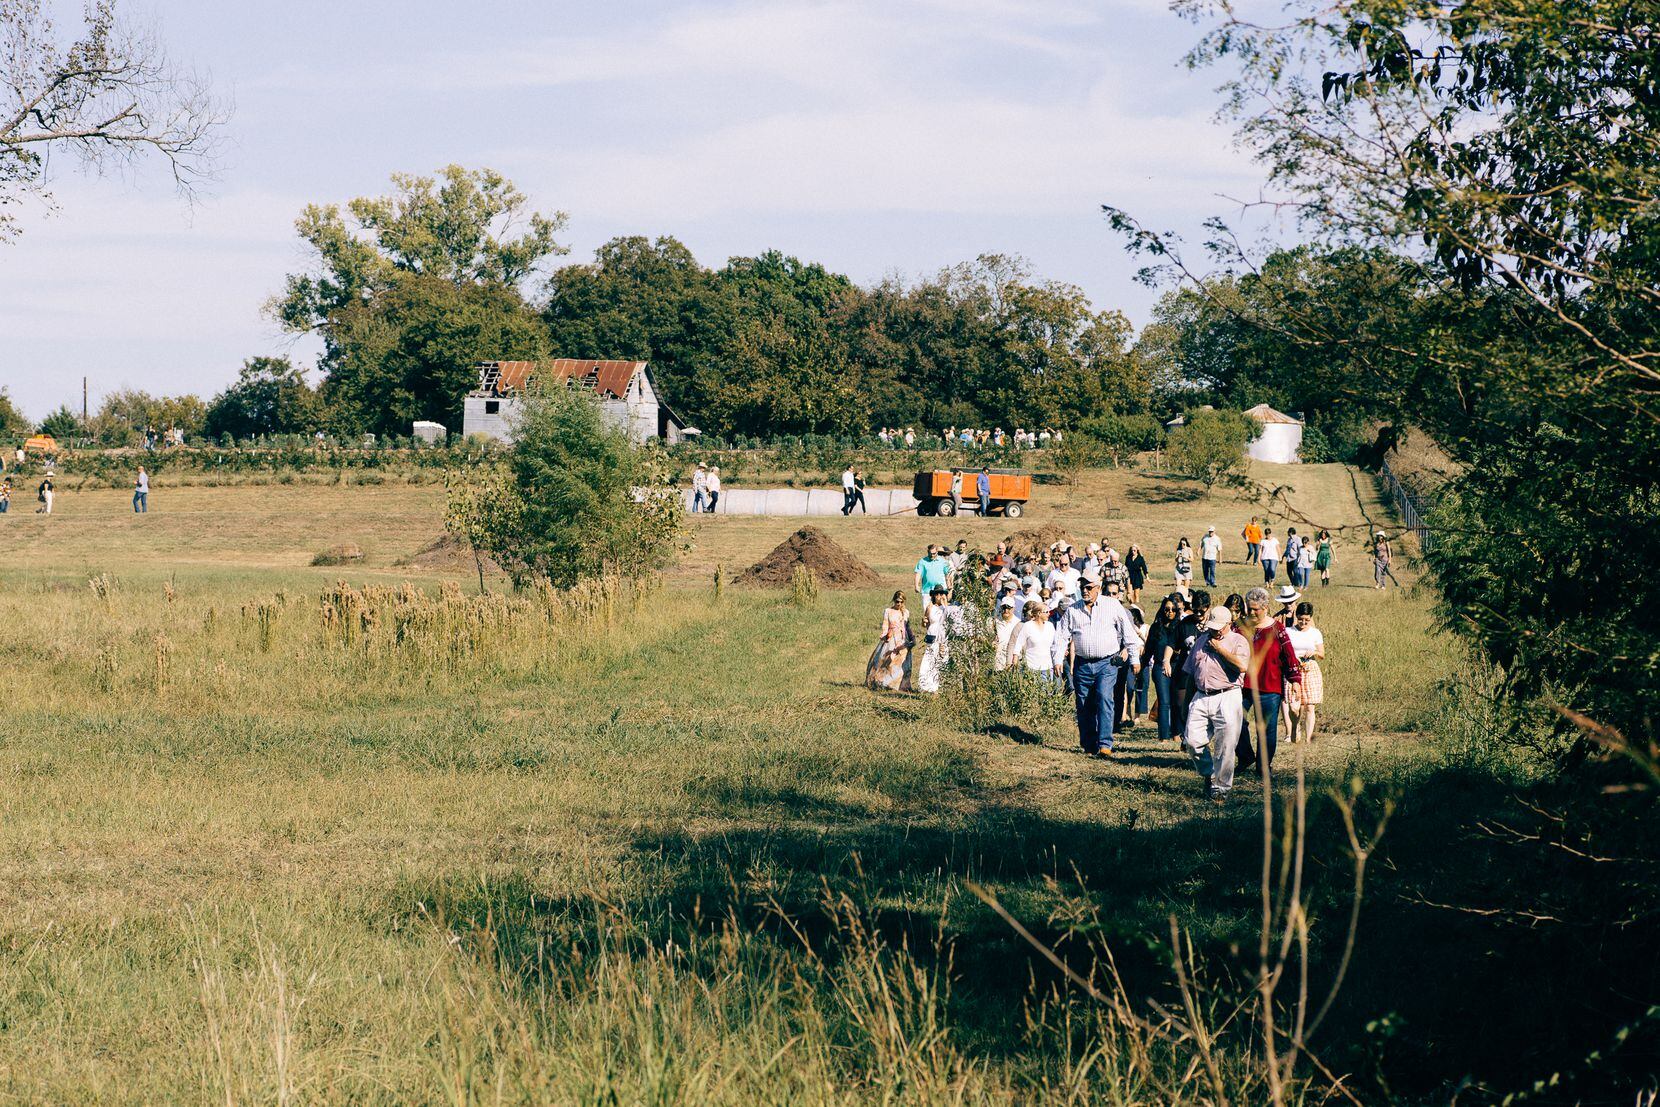 In 2017, Pure Land Farm in McKinney was the site of an Outstanding in the Field dining event celebrating local food producers. The farm, which belongs to Megan and father Jack Neubauer, hosted the event four times, along with several farm tours and dinners, for the close-knit, farm-to-table McKinney community. Restaurateur Rick Wells has been instrumental in bringing that community together.